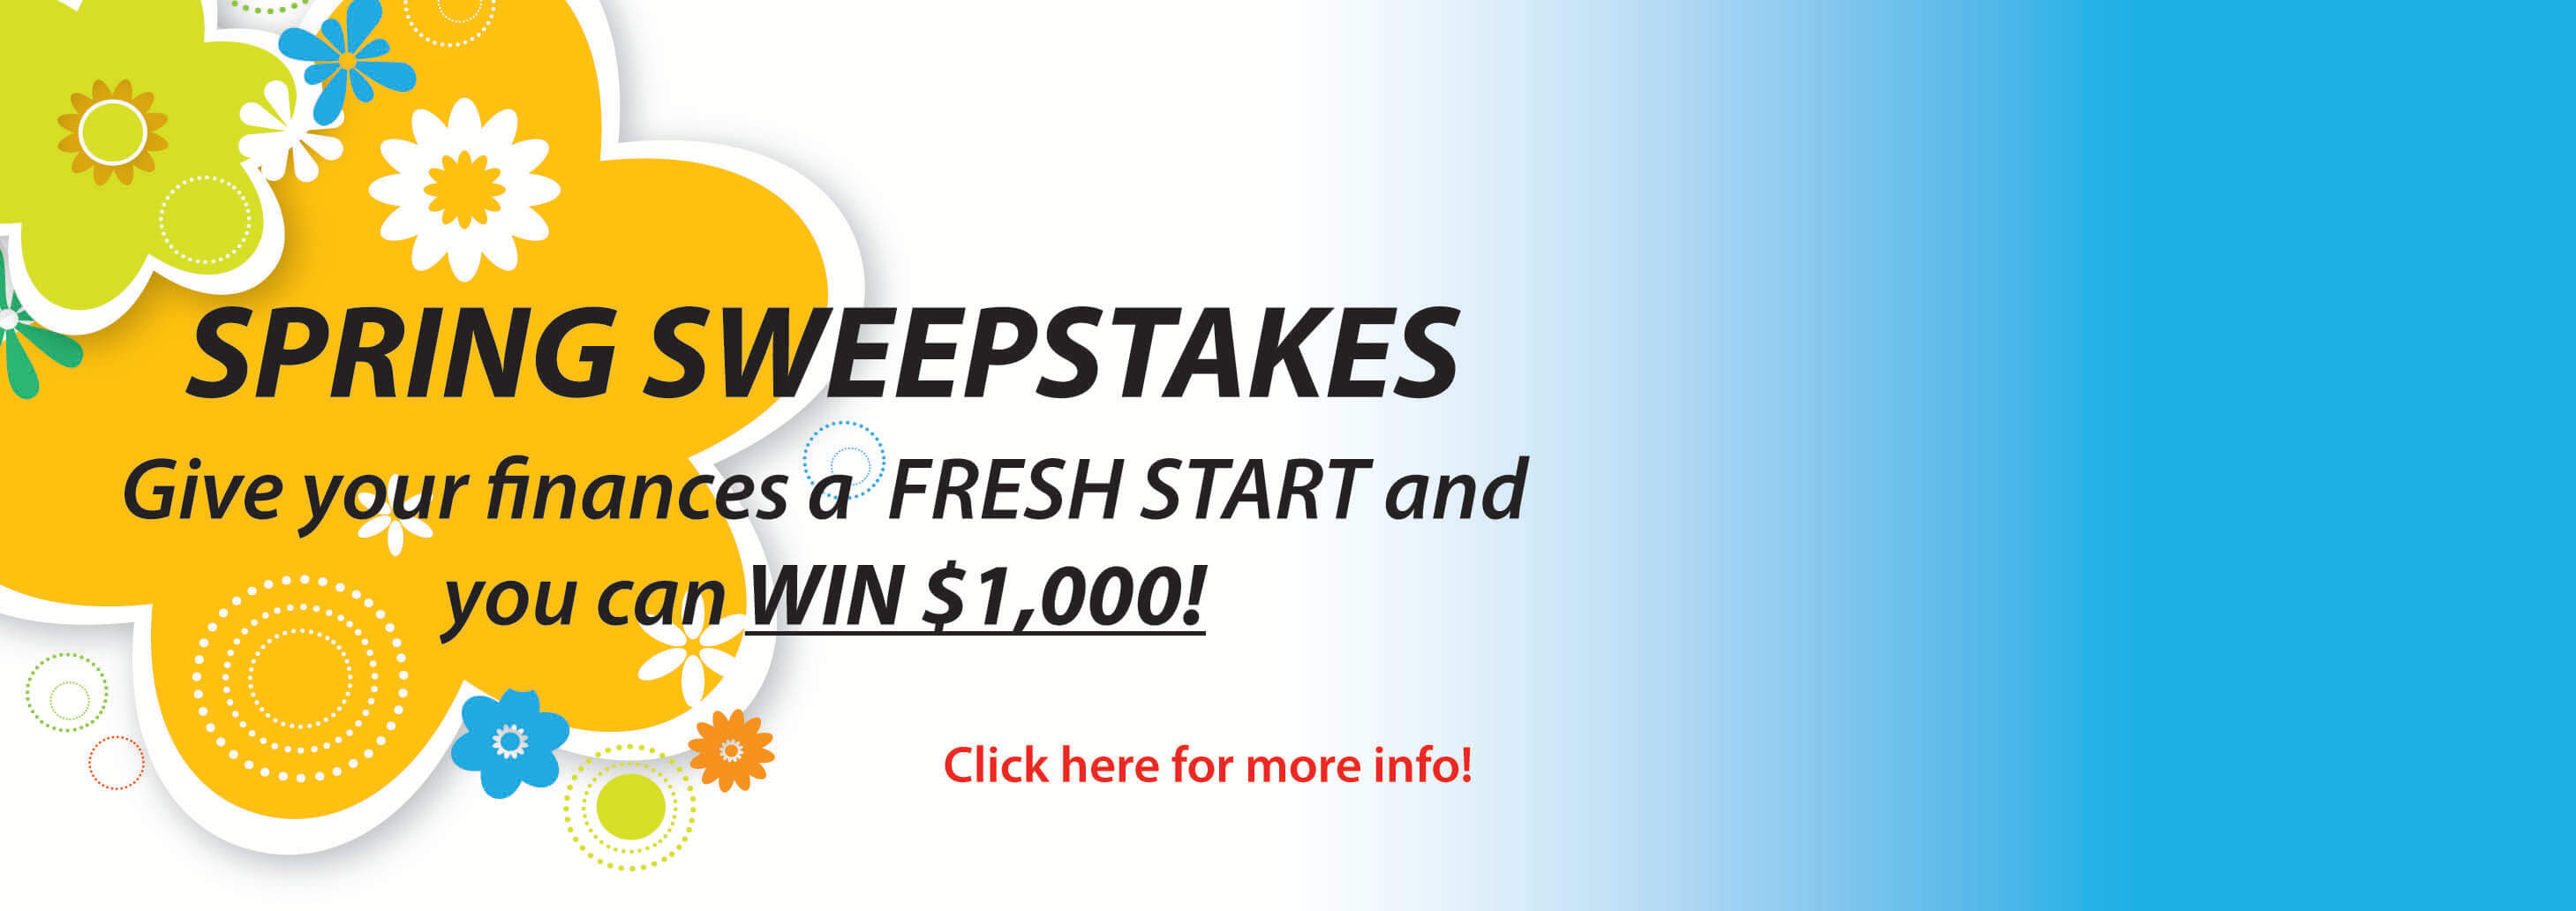 Spring Sweepstakes - Give your finances a fresh start and you can in $1,000! Click for more info.